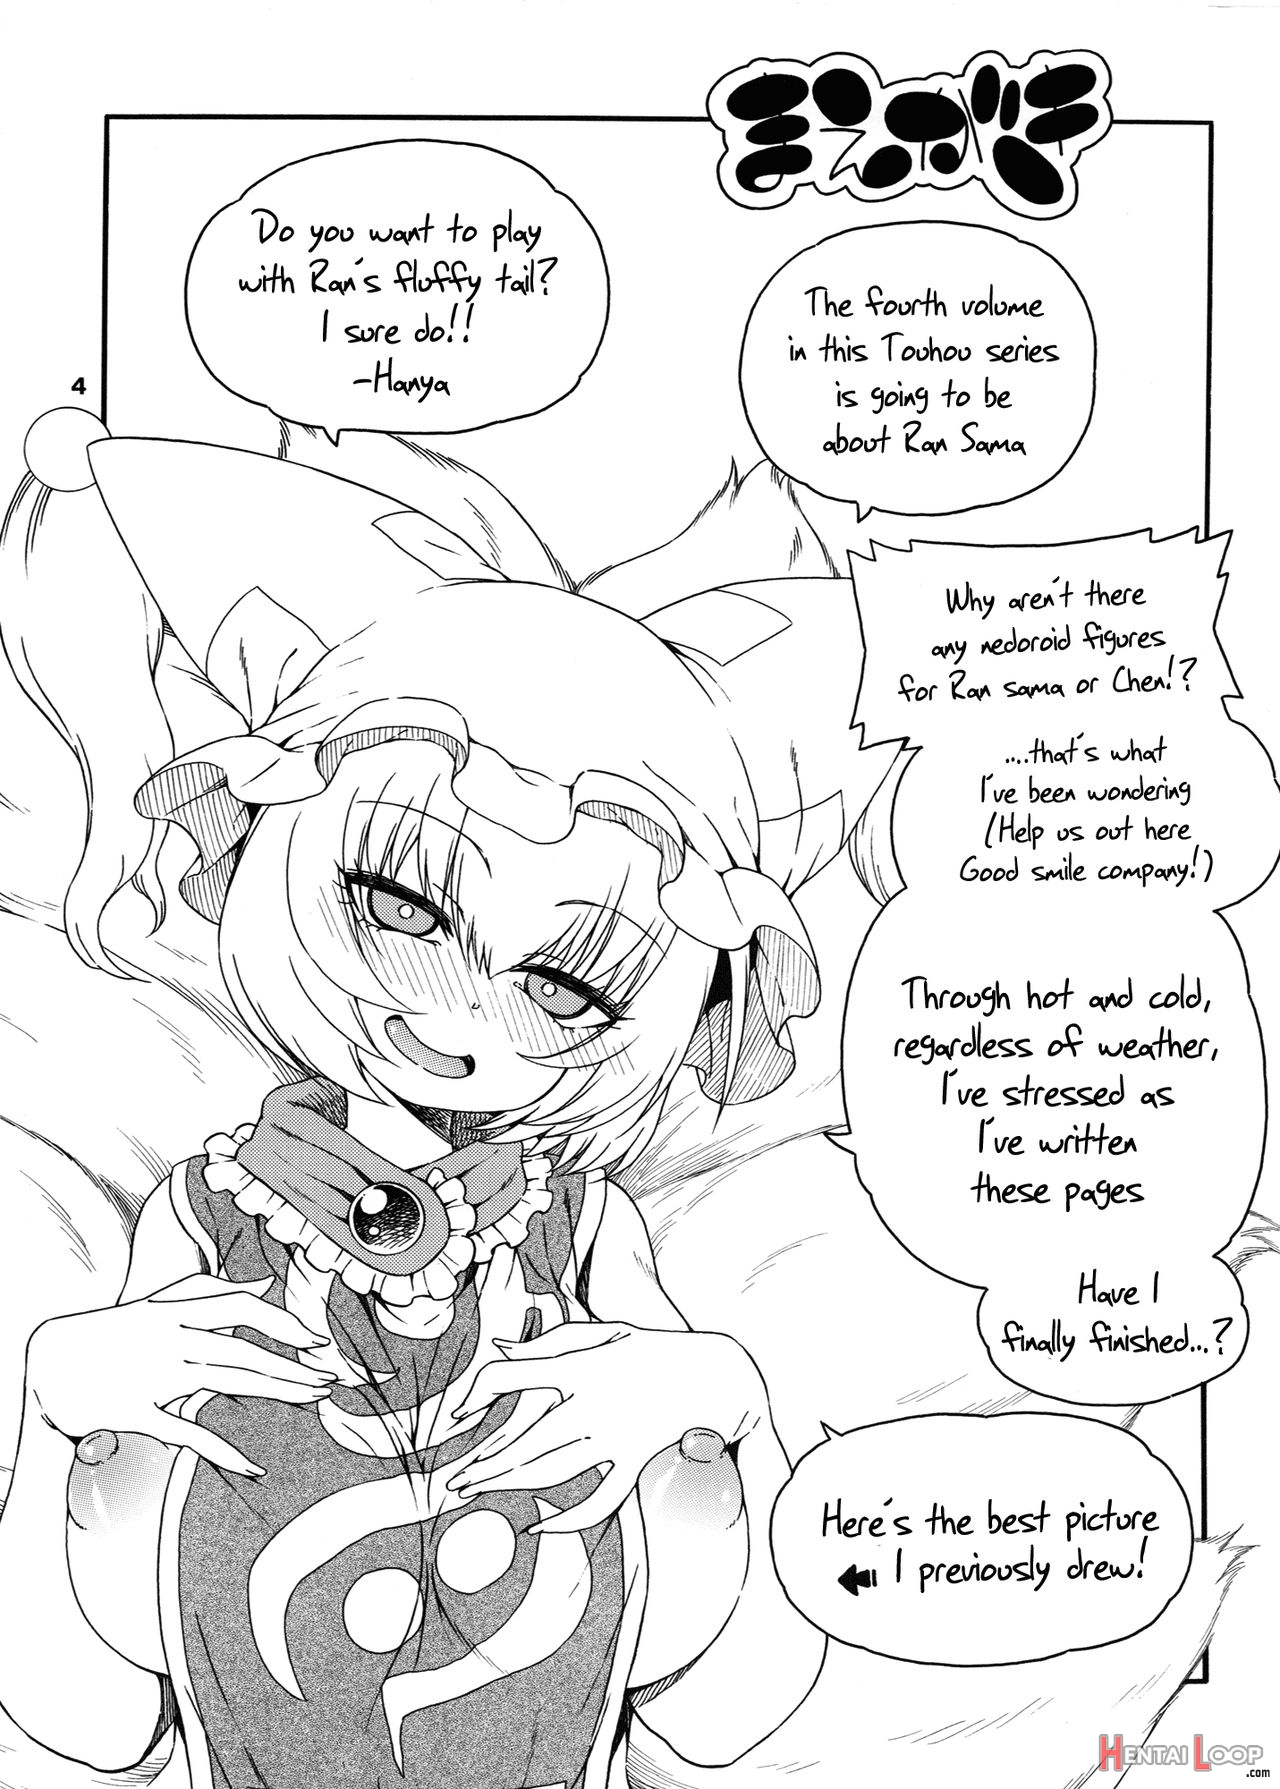 Lost In Touhou ~yakumo Ran Edition~ page 3